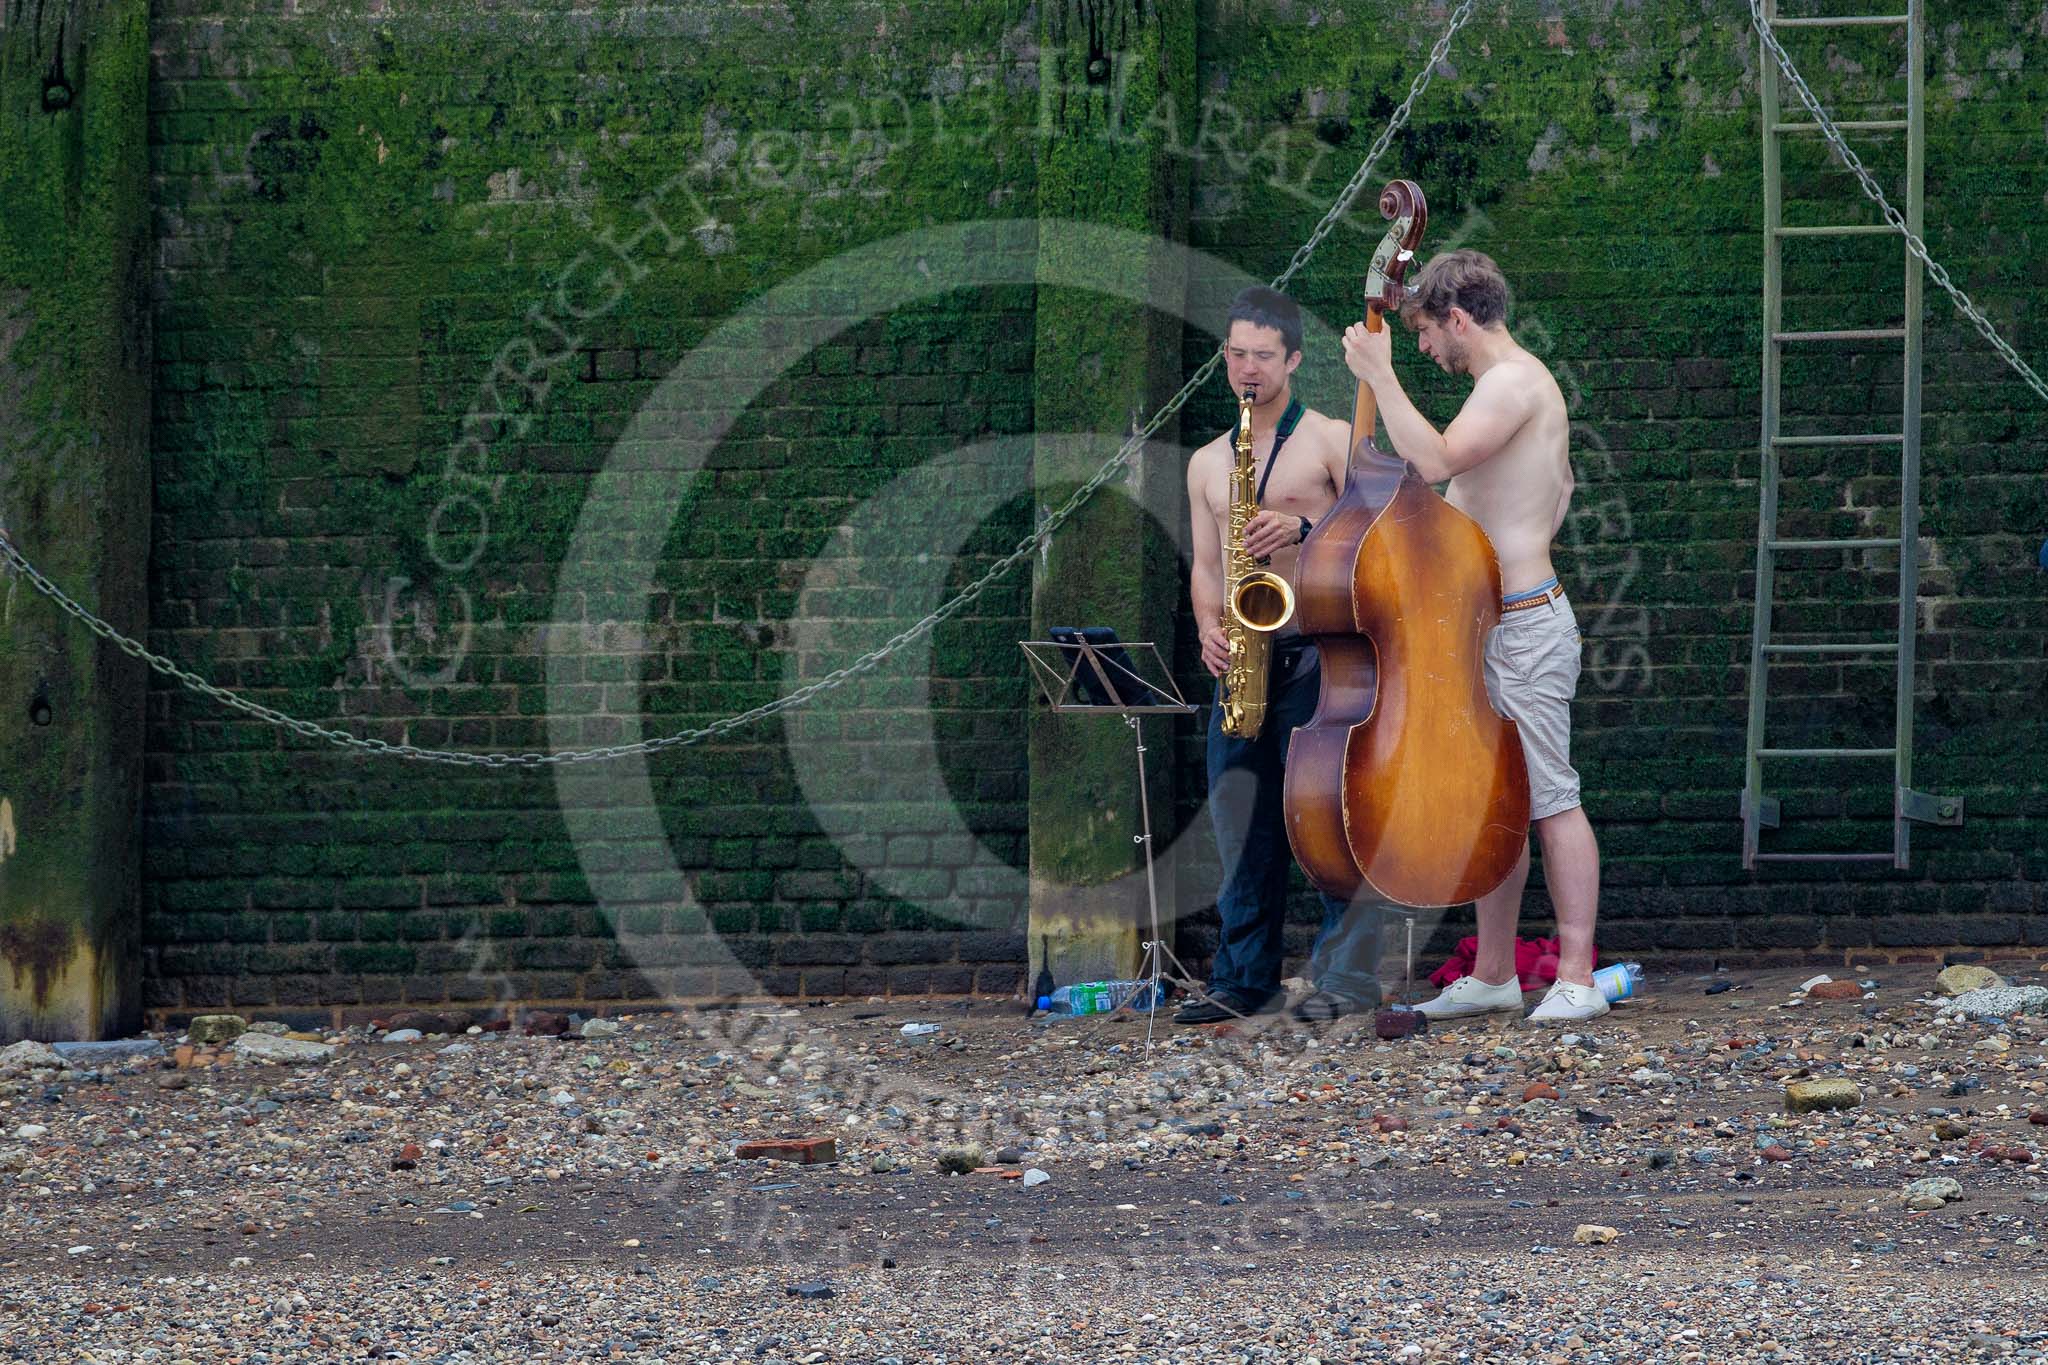 TOW River Thames Barge Driving Race 2013: Two young male musicians playing their instruments by the river..
River Thames between Greenwich and Westminster,
London,

United Kingdom,
on 13 July 2013 at 13:32, image #353